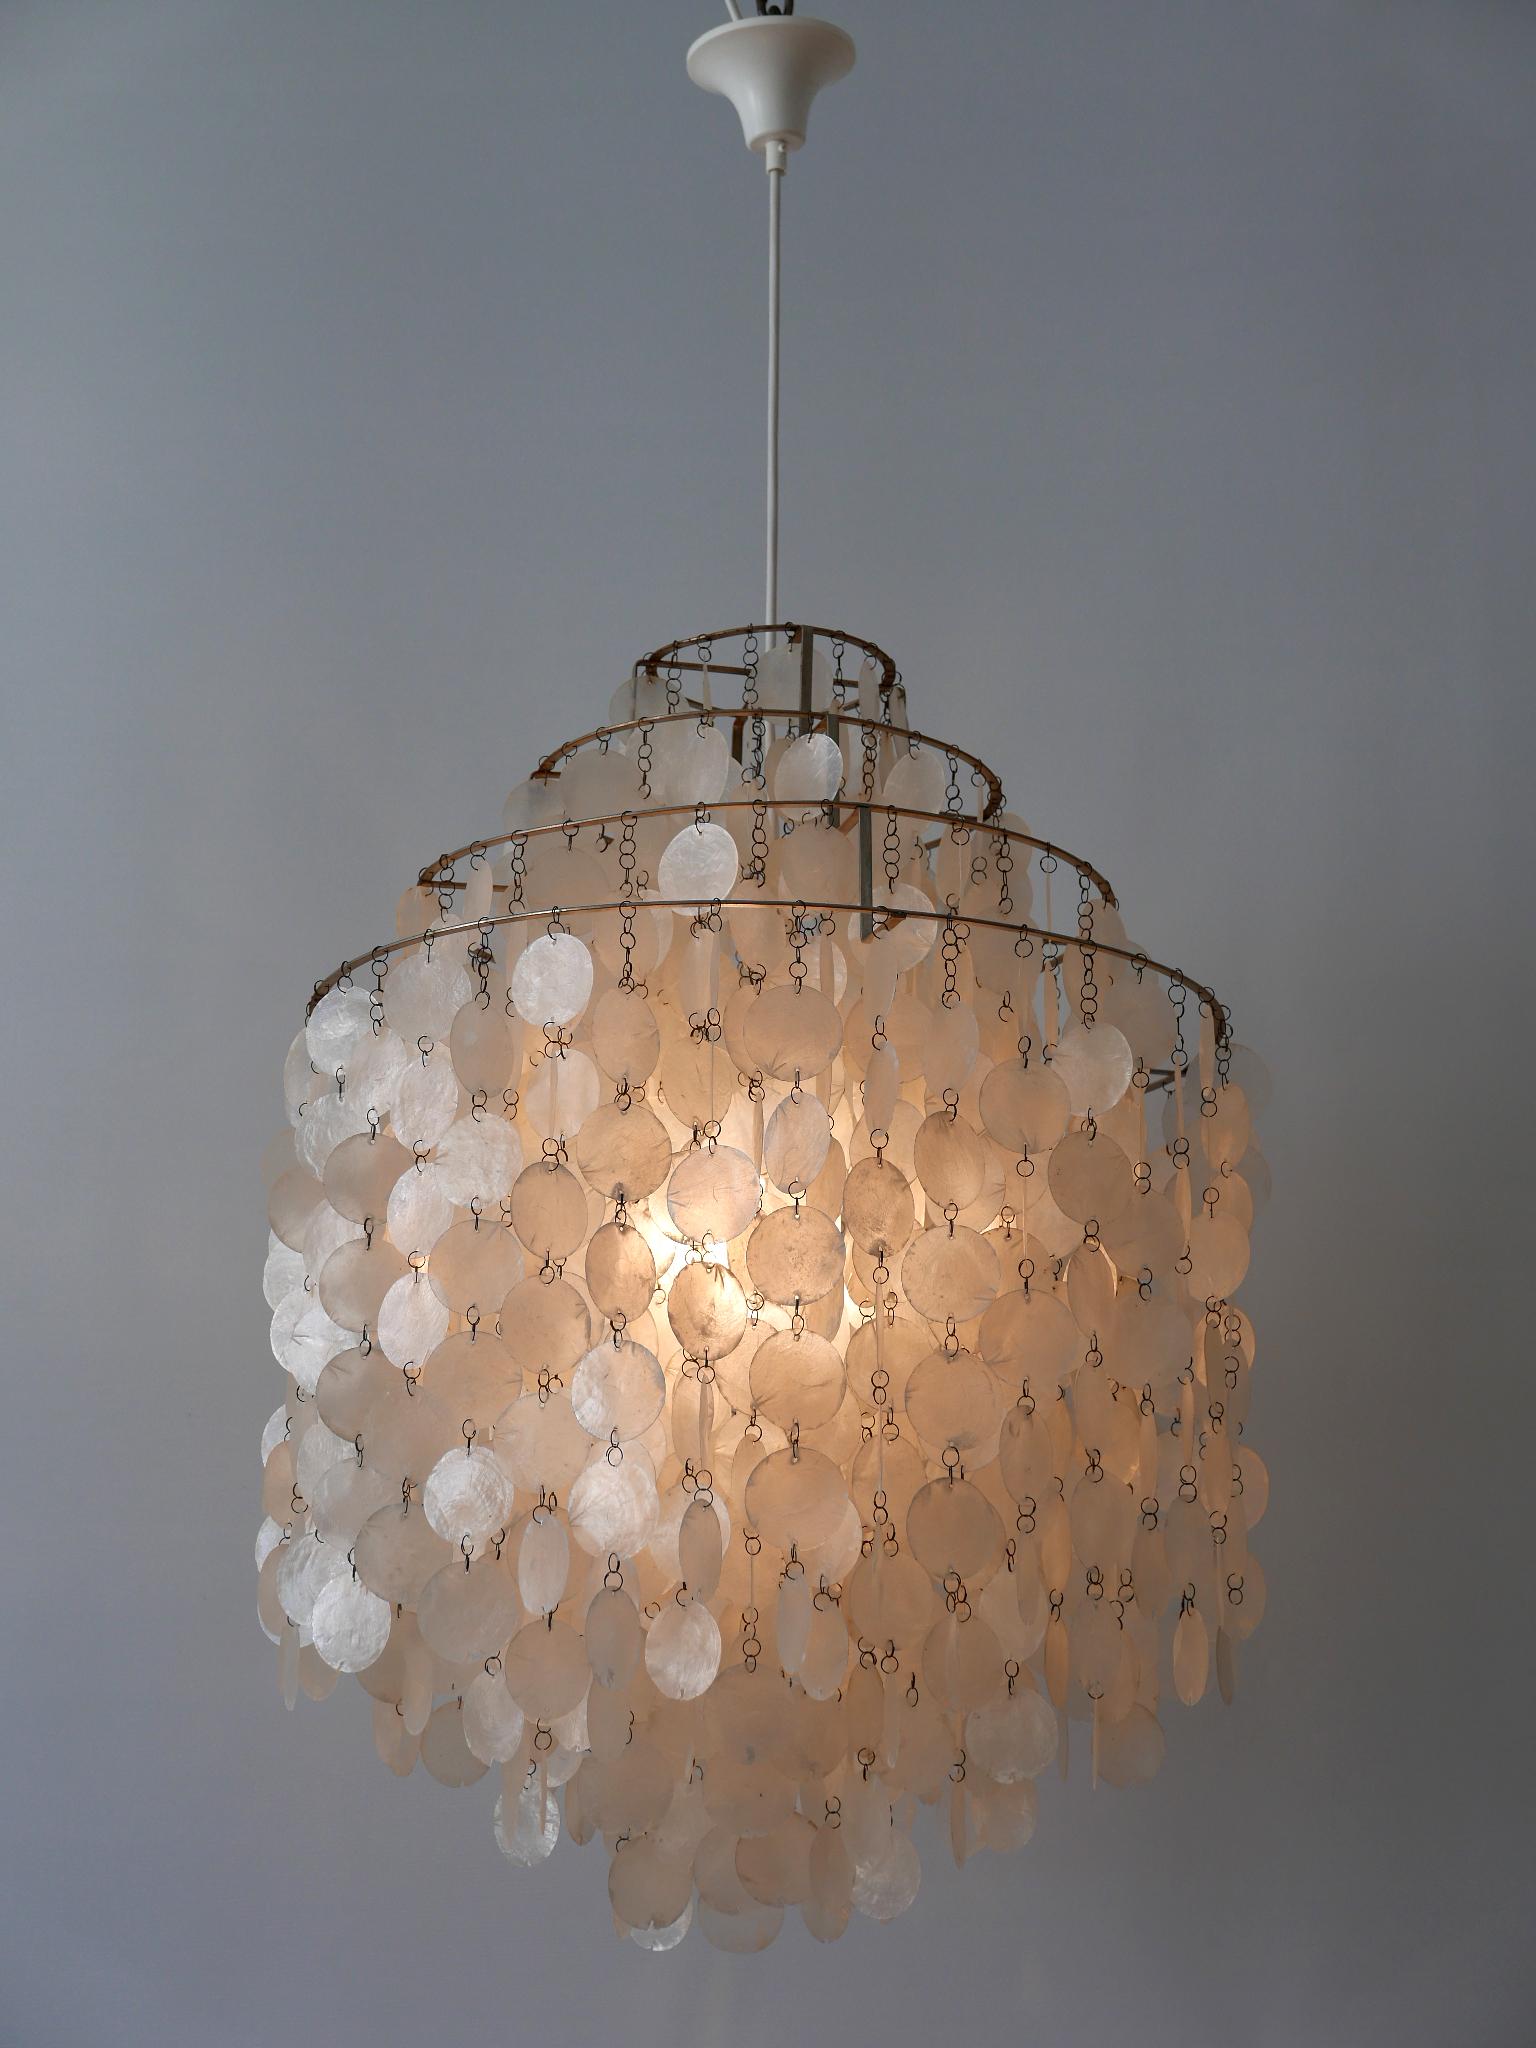 Early Pendant Lamp or Chandelier FUN 0DM by Verner Panton for Lüber CH 1960s For Sale 3